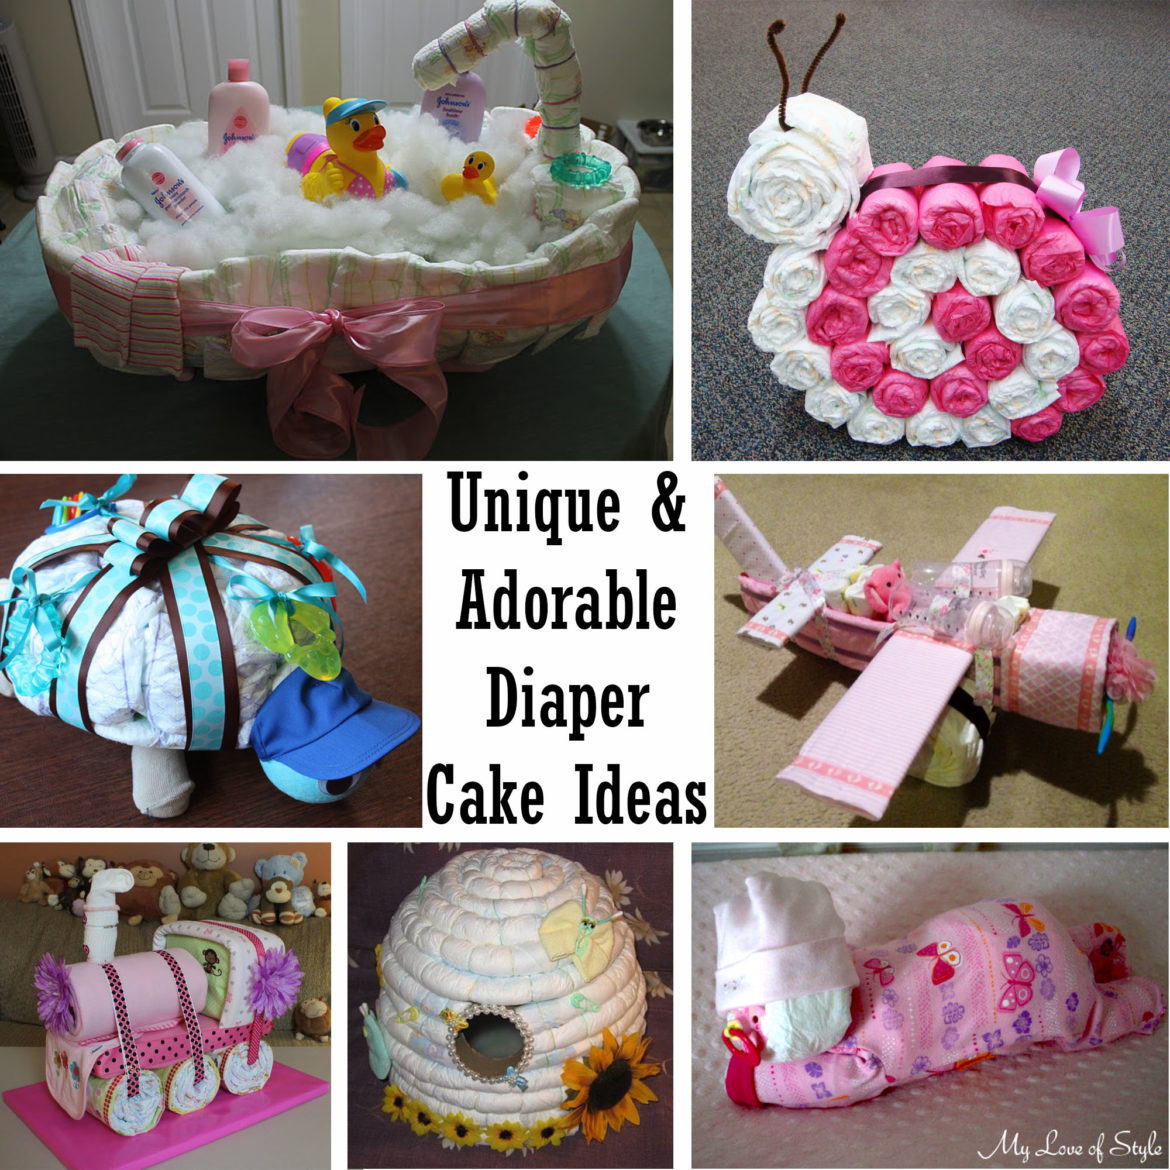 Adorable Diaper Cake - The Keeper the